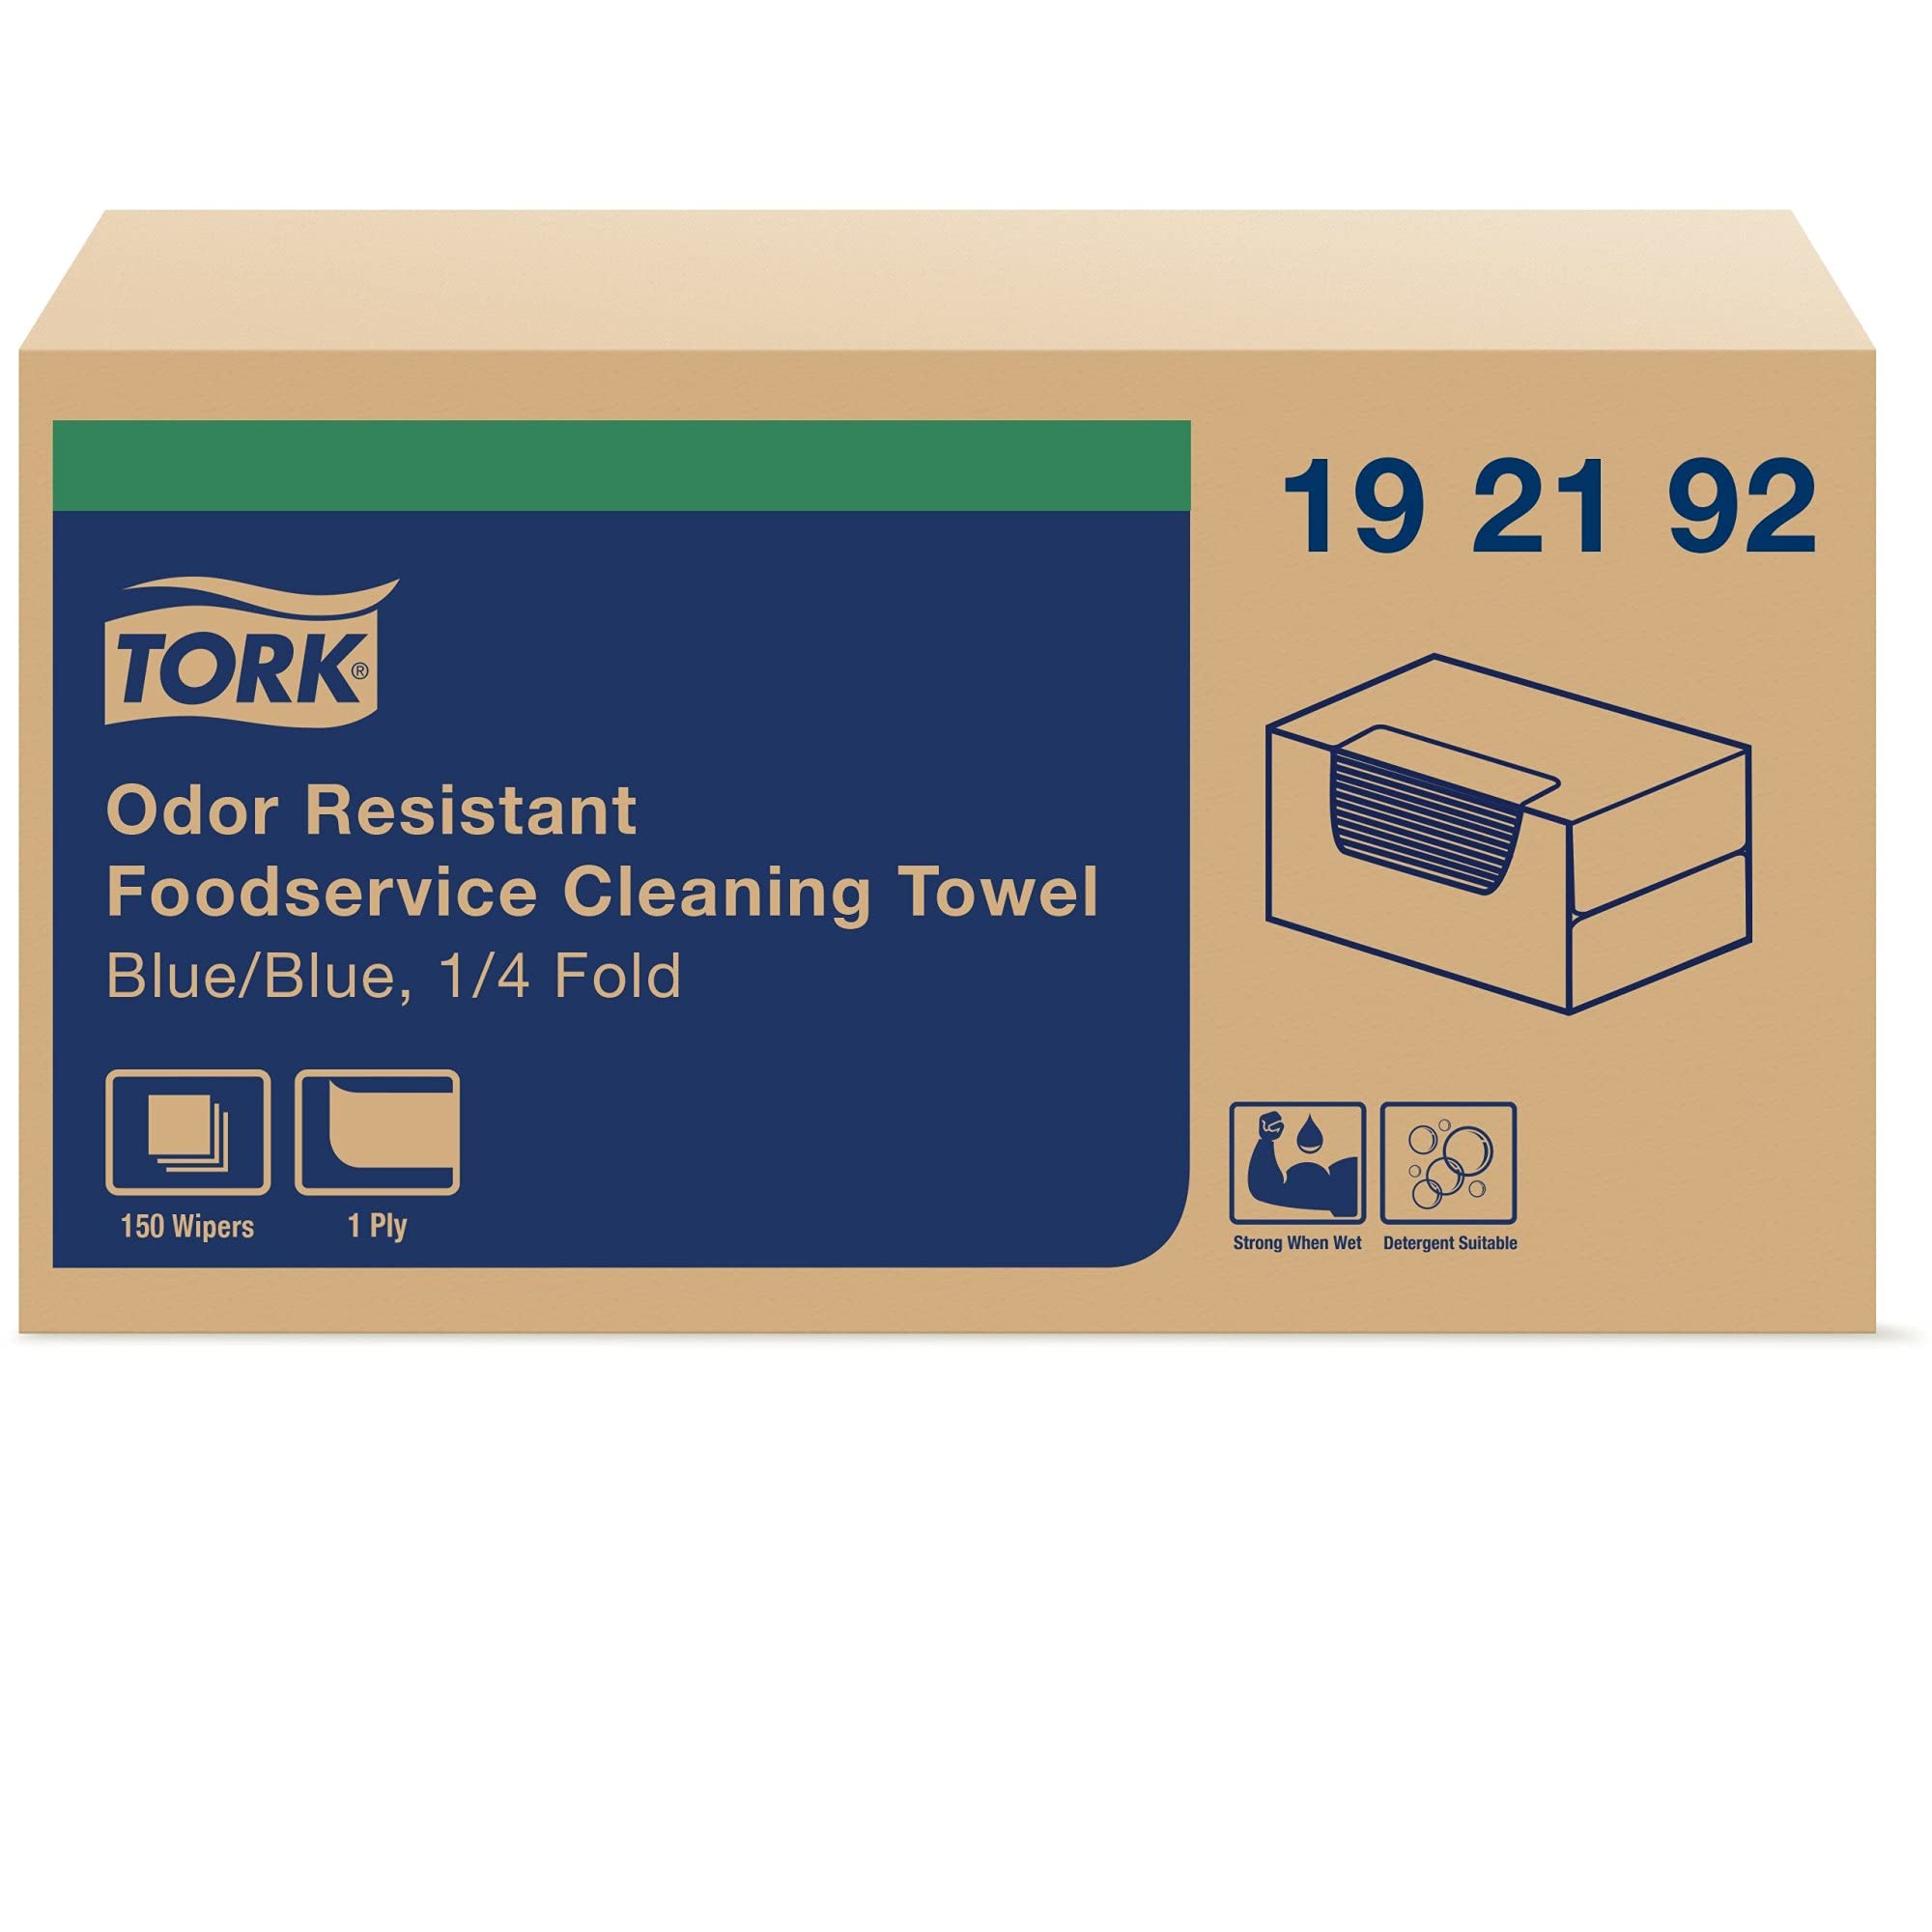 Tork 192192 Odor Resistant Foodservice Cleaning Towel, 1/4 Fold, 13" Width x 24" Length, Blue/Blue Stripe (Case of 1 Box, 150 Cloths per Box)